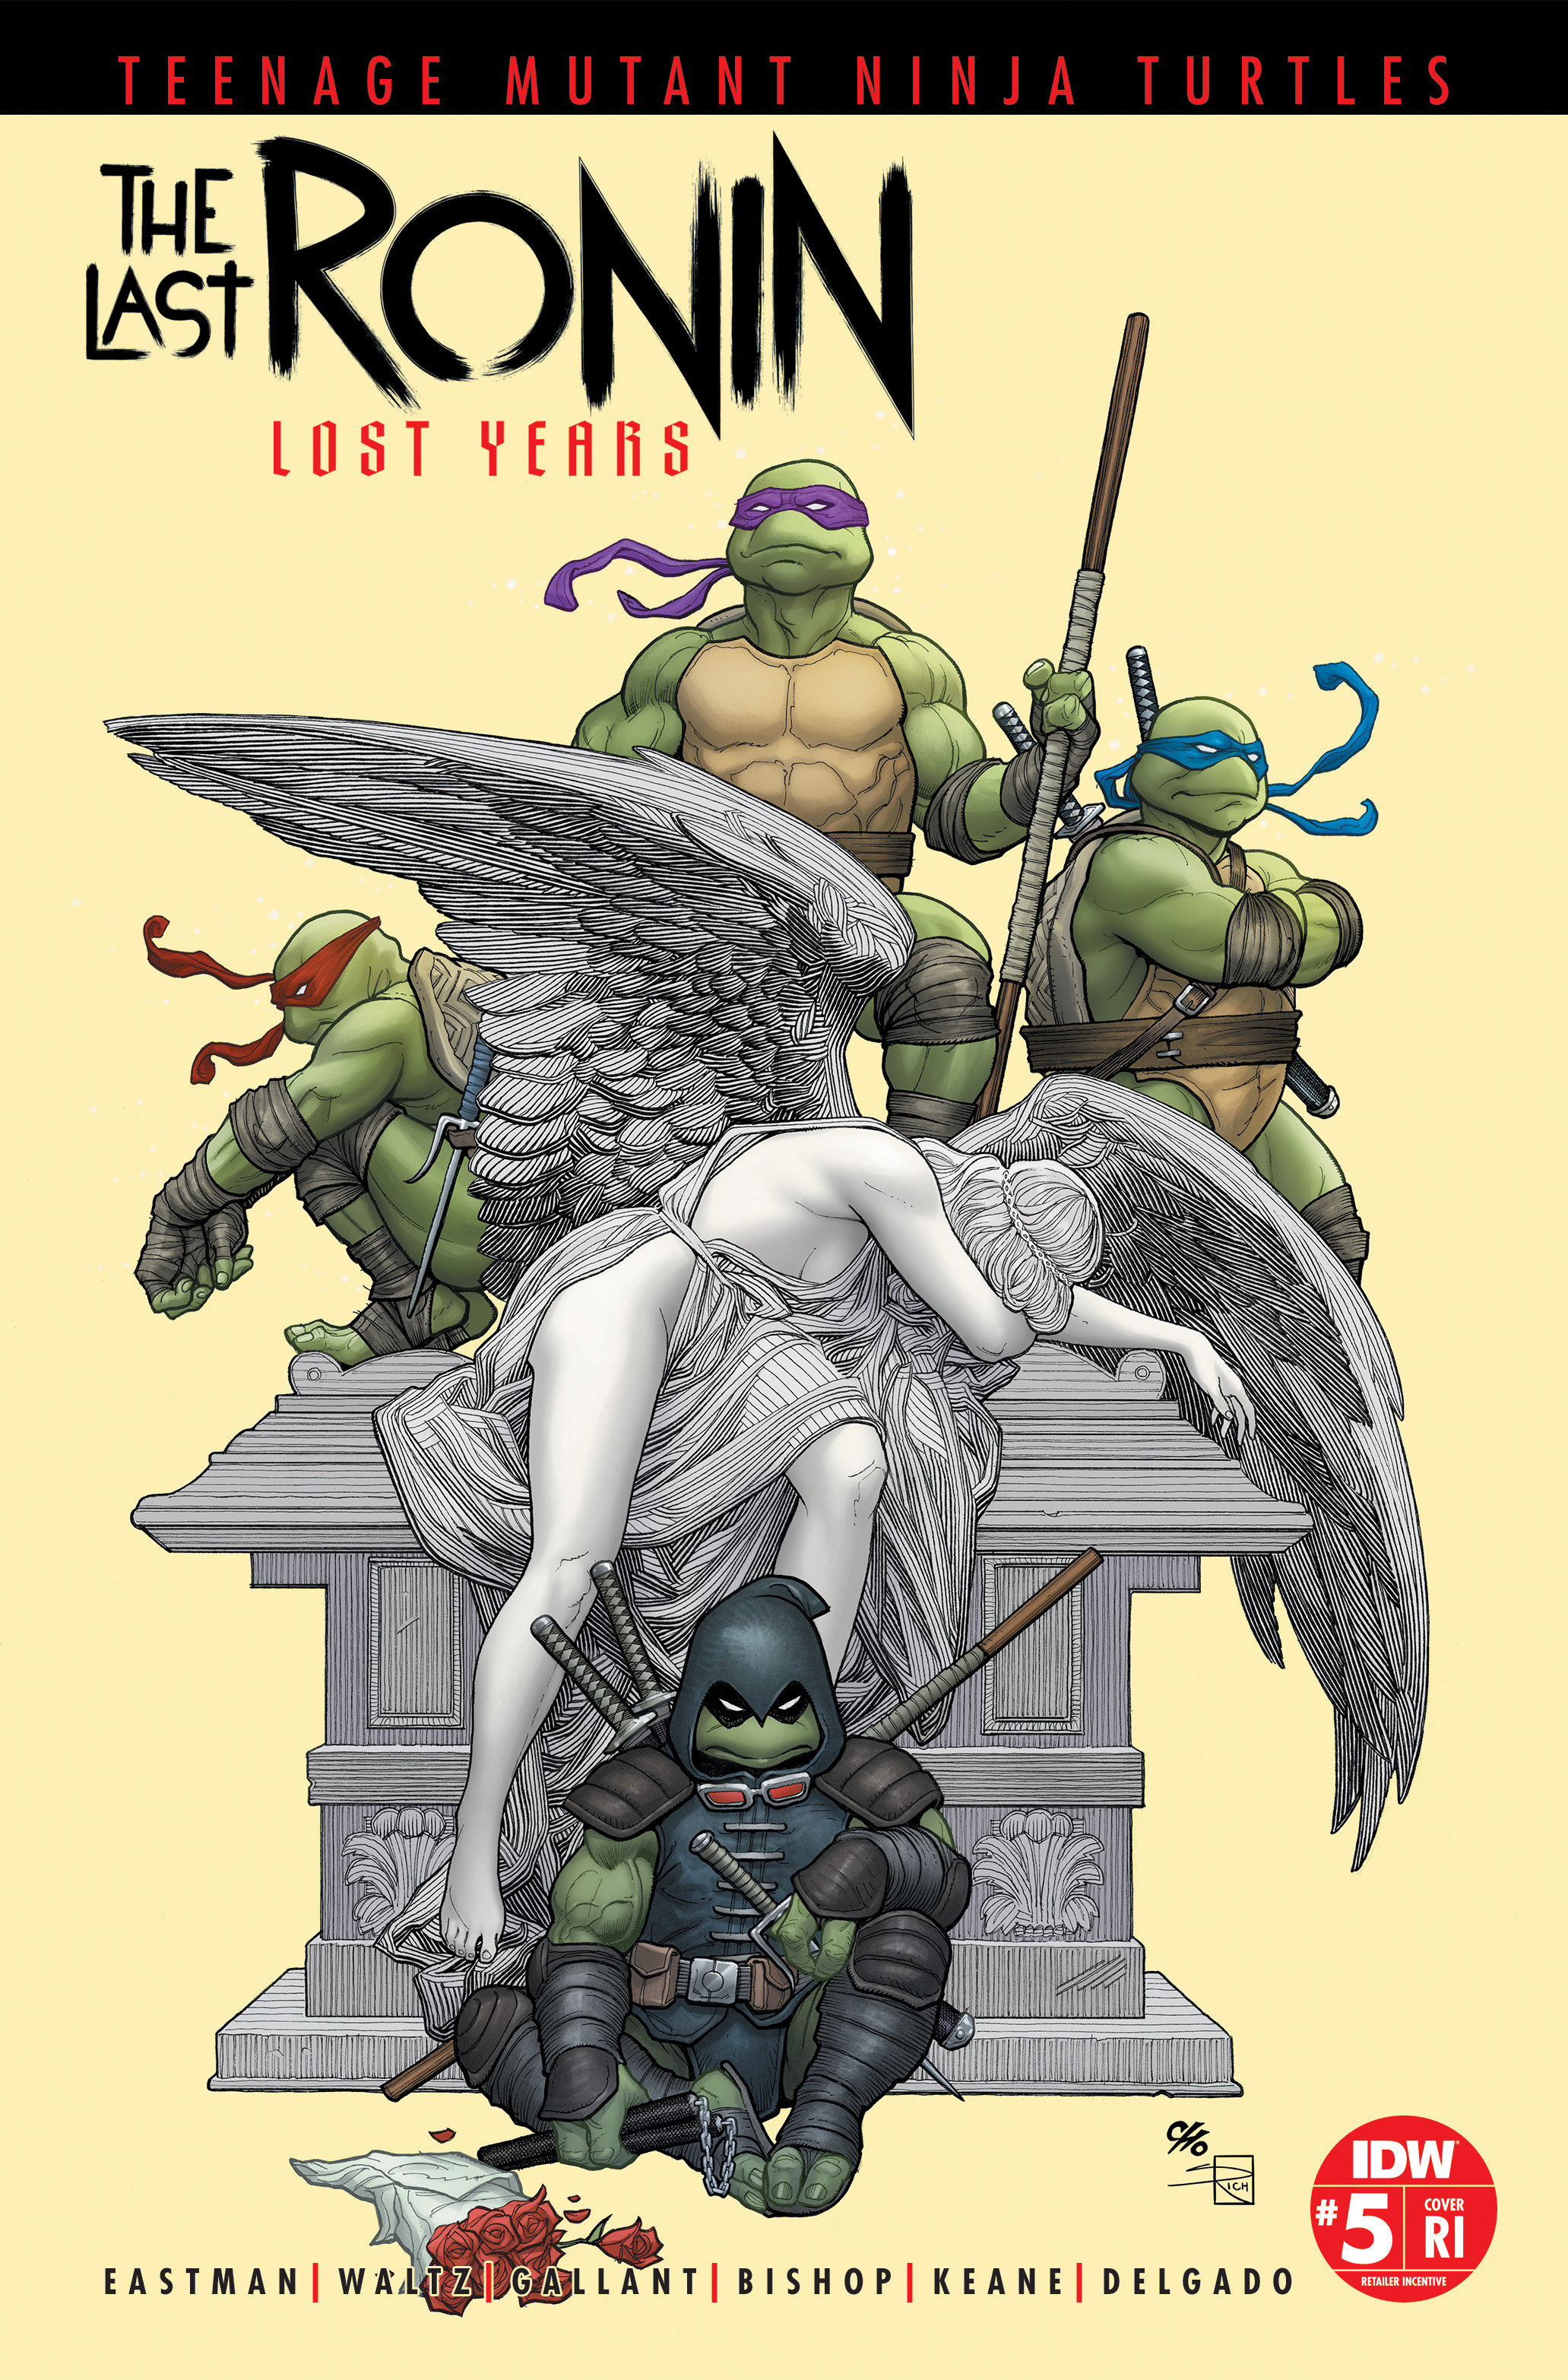 Teenage Mutant Ninja Turtles Last Ronin Lost Years #5 Cover D 1 for 25 Incentive Cho